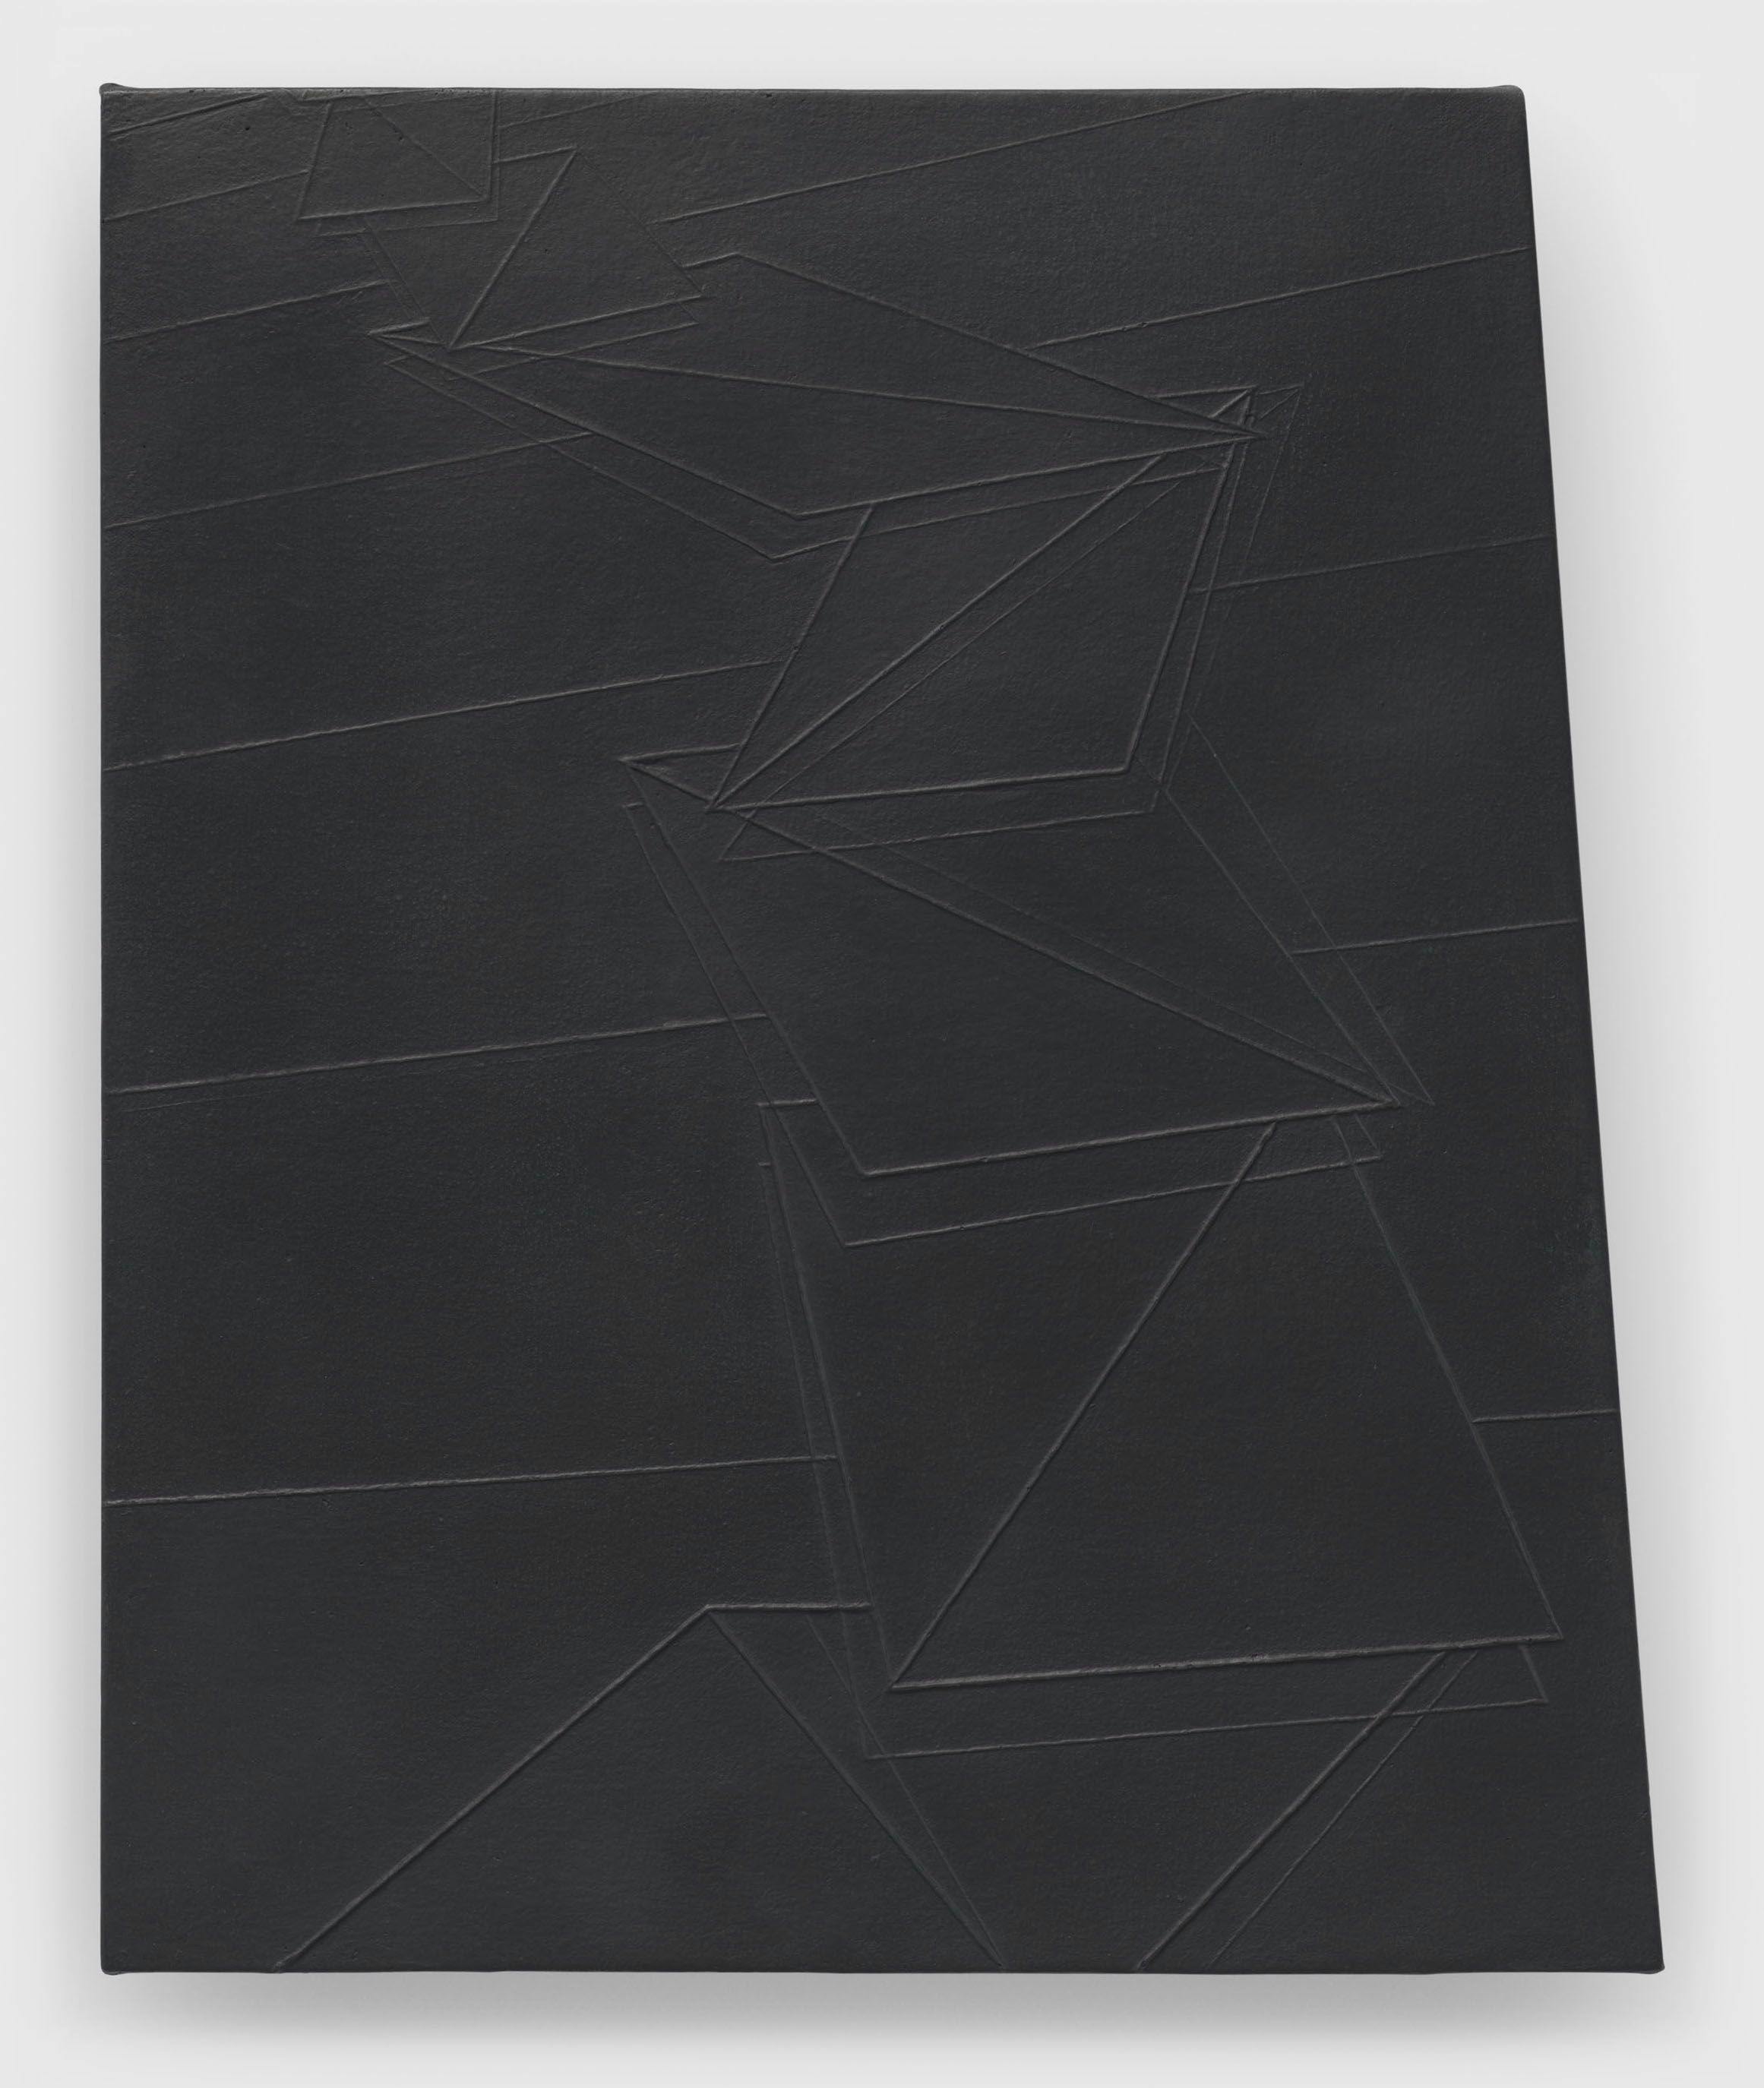 A painting by Tomma Abts, titled Nante, dated 2019.